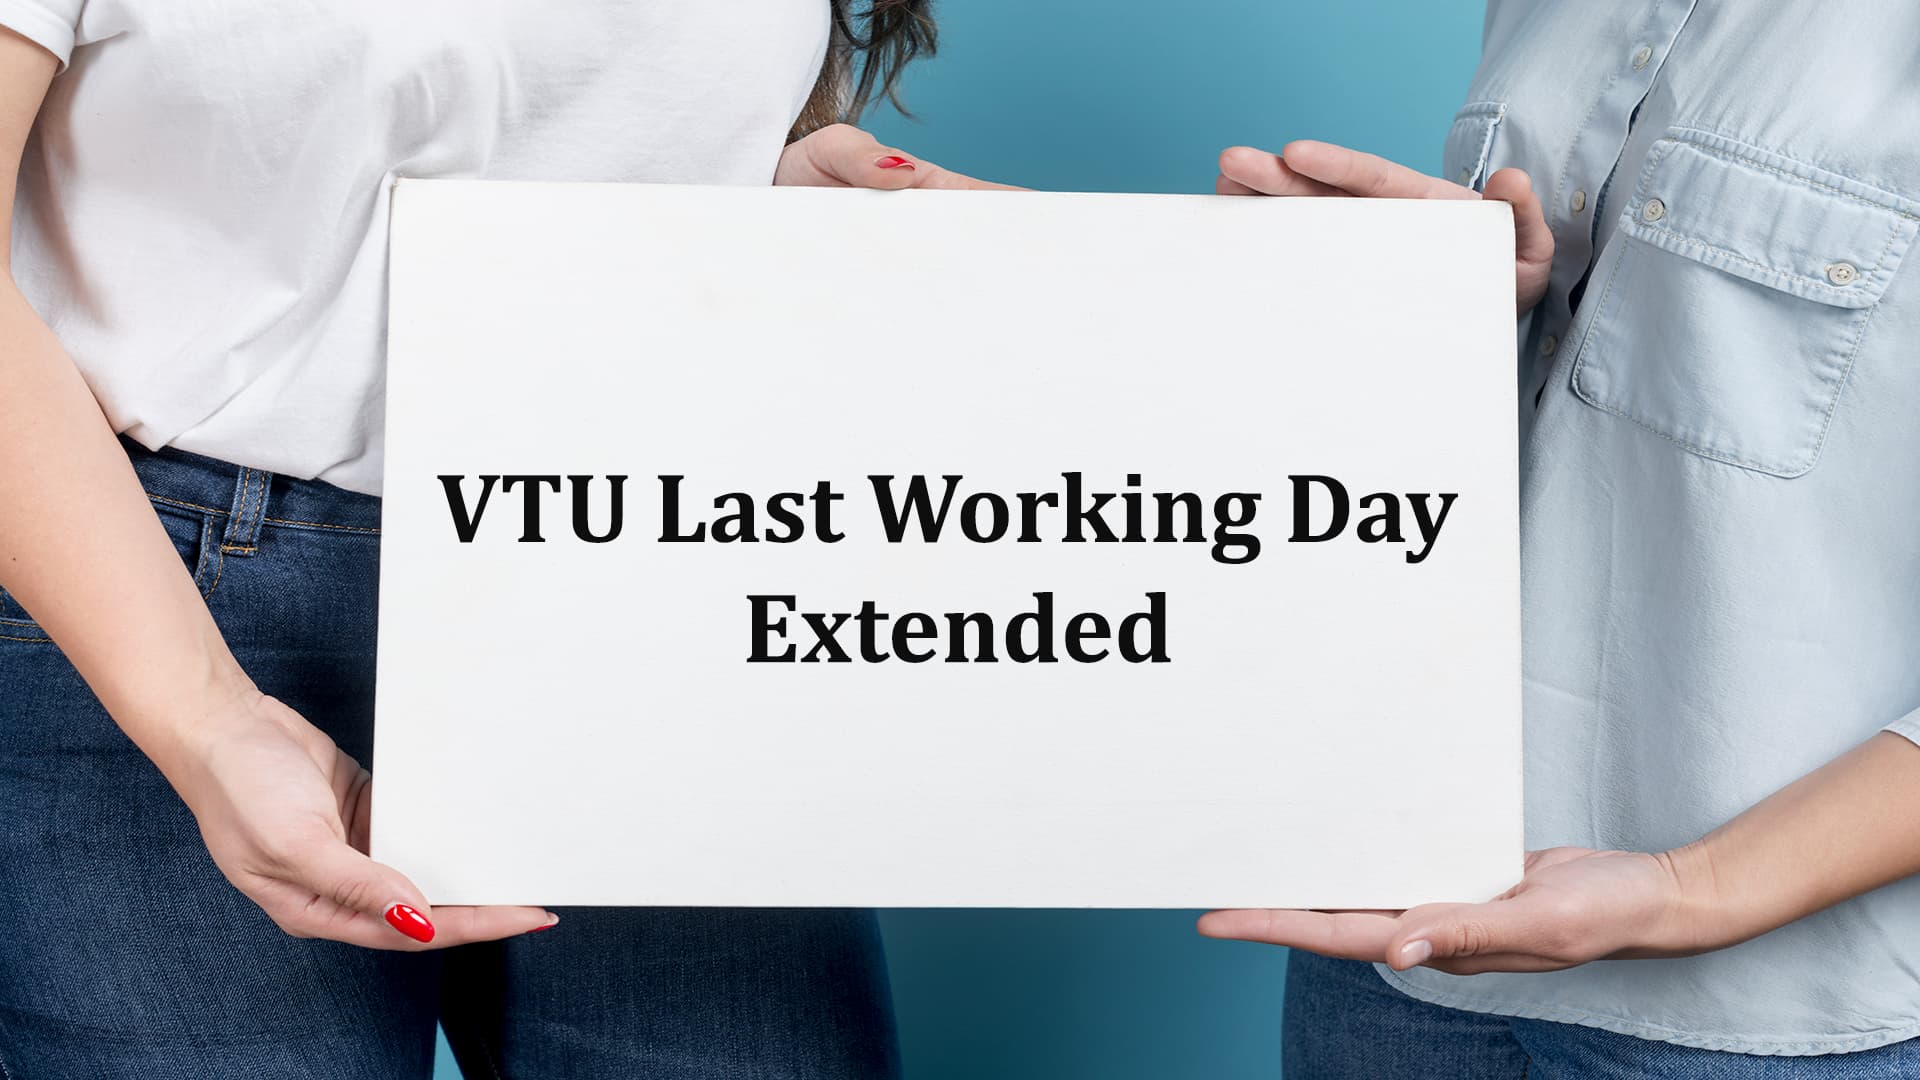 VTU Last Working Day Extended